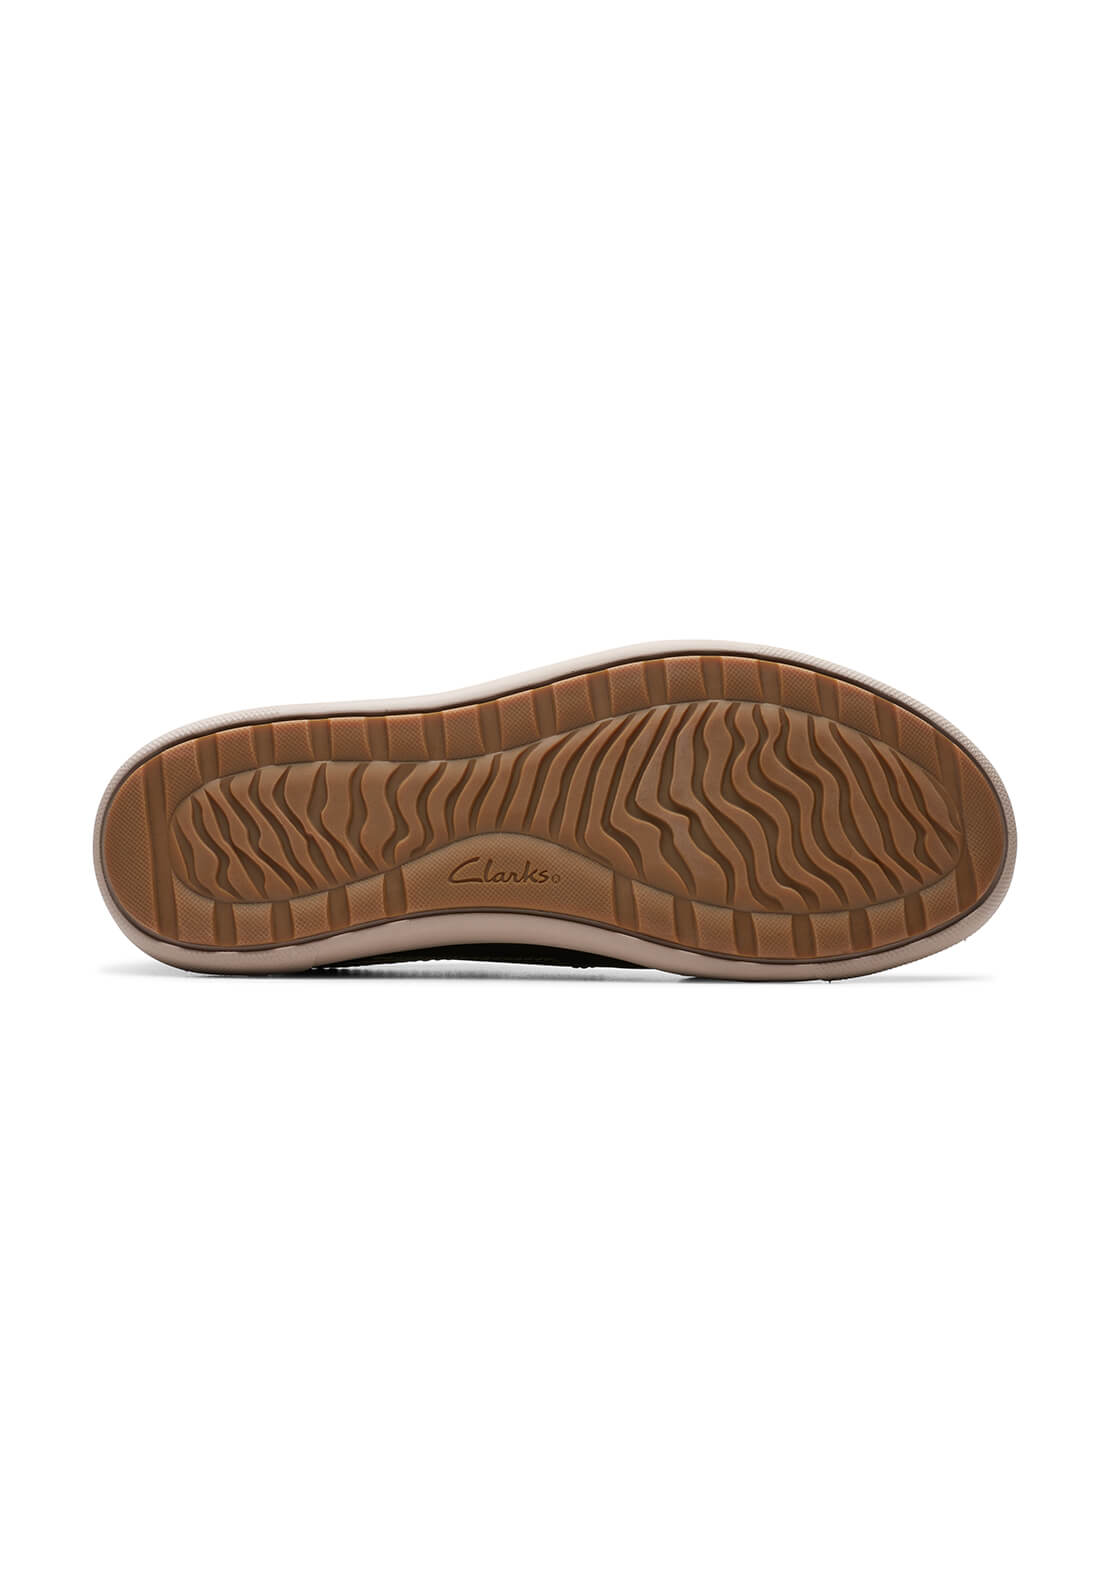 Clarks Mapstone Step Shoe 7 Shaws Department Stores